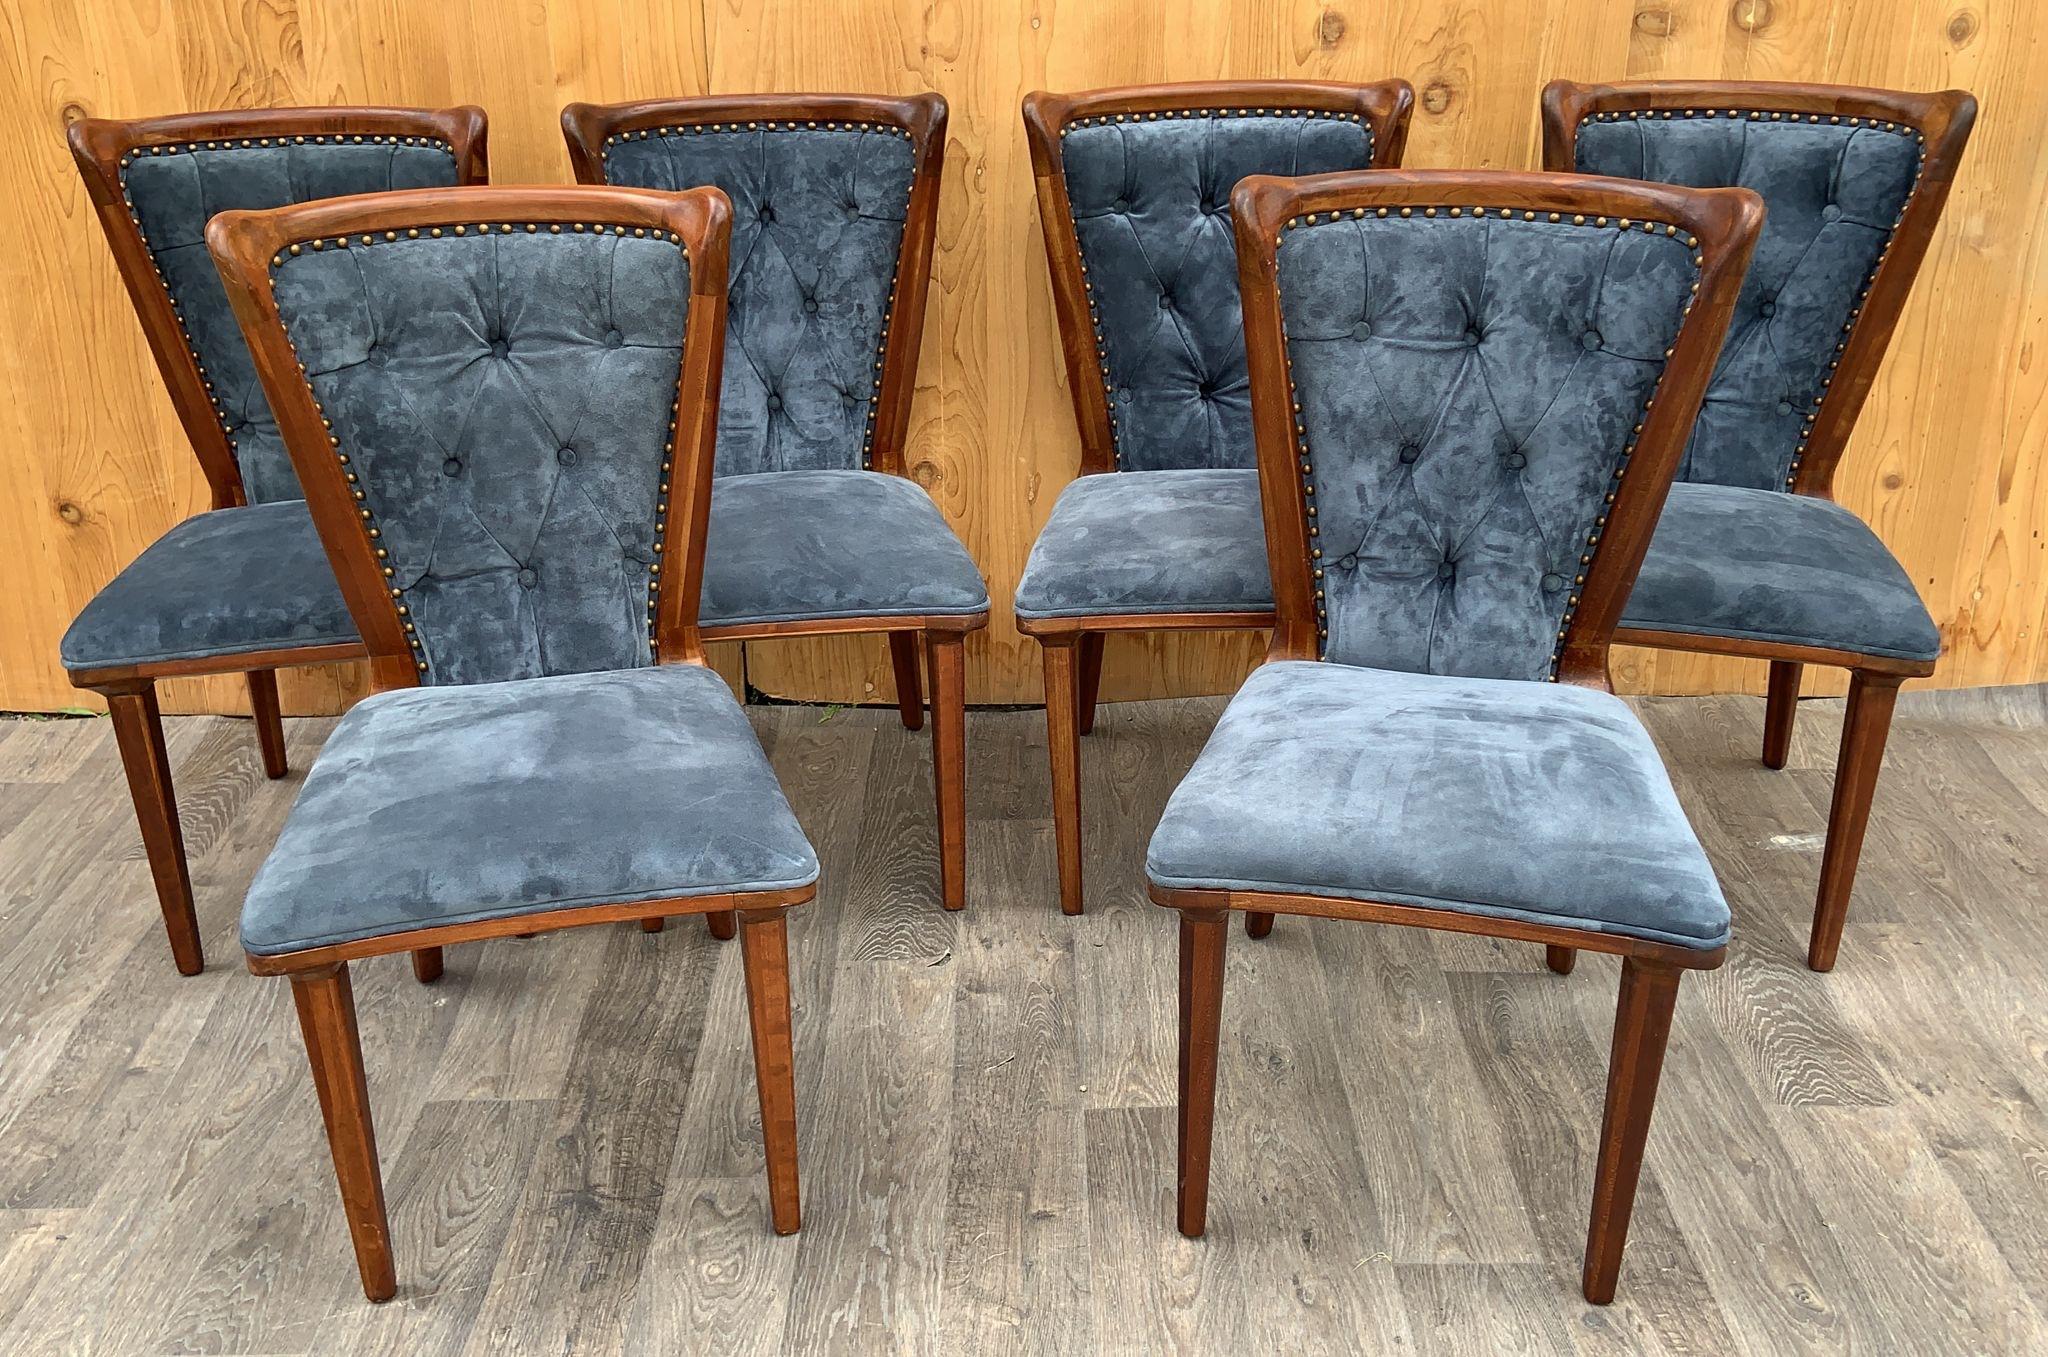 Vintage Italian Art Deco Sculptural Curved Back Dining Chairs Newly Upholstered in a Holly Hunt Blue Suede - Set of 6

The Vintage Italian Art Deco Sculptural Curved Back Dining Chairs, newly upholstered in Holly Hunt Blue Suede, form a stunning and